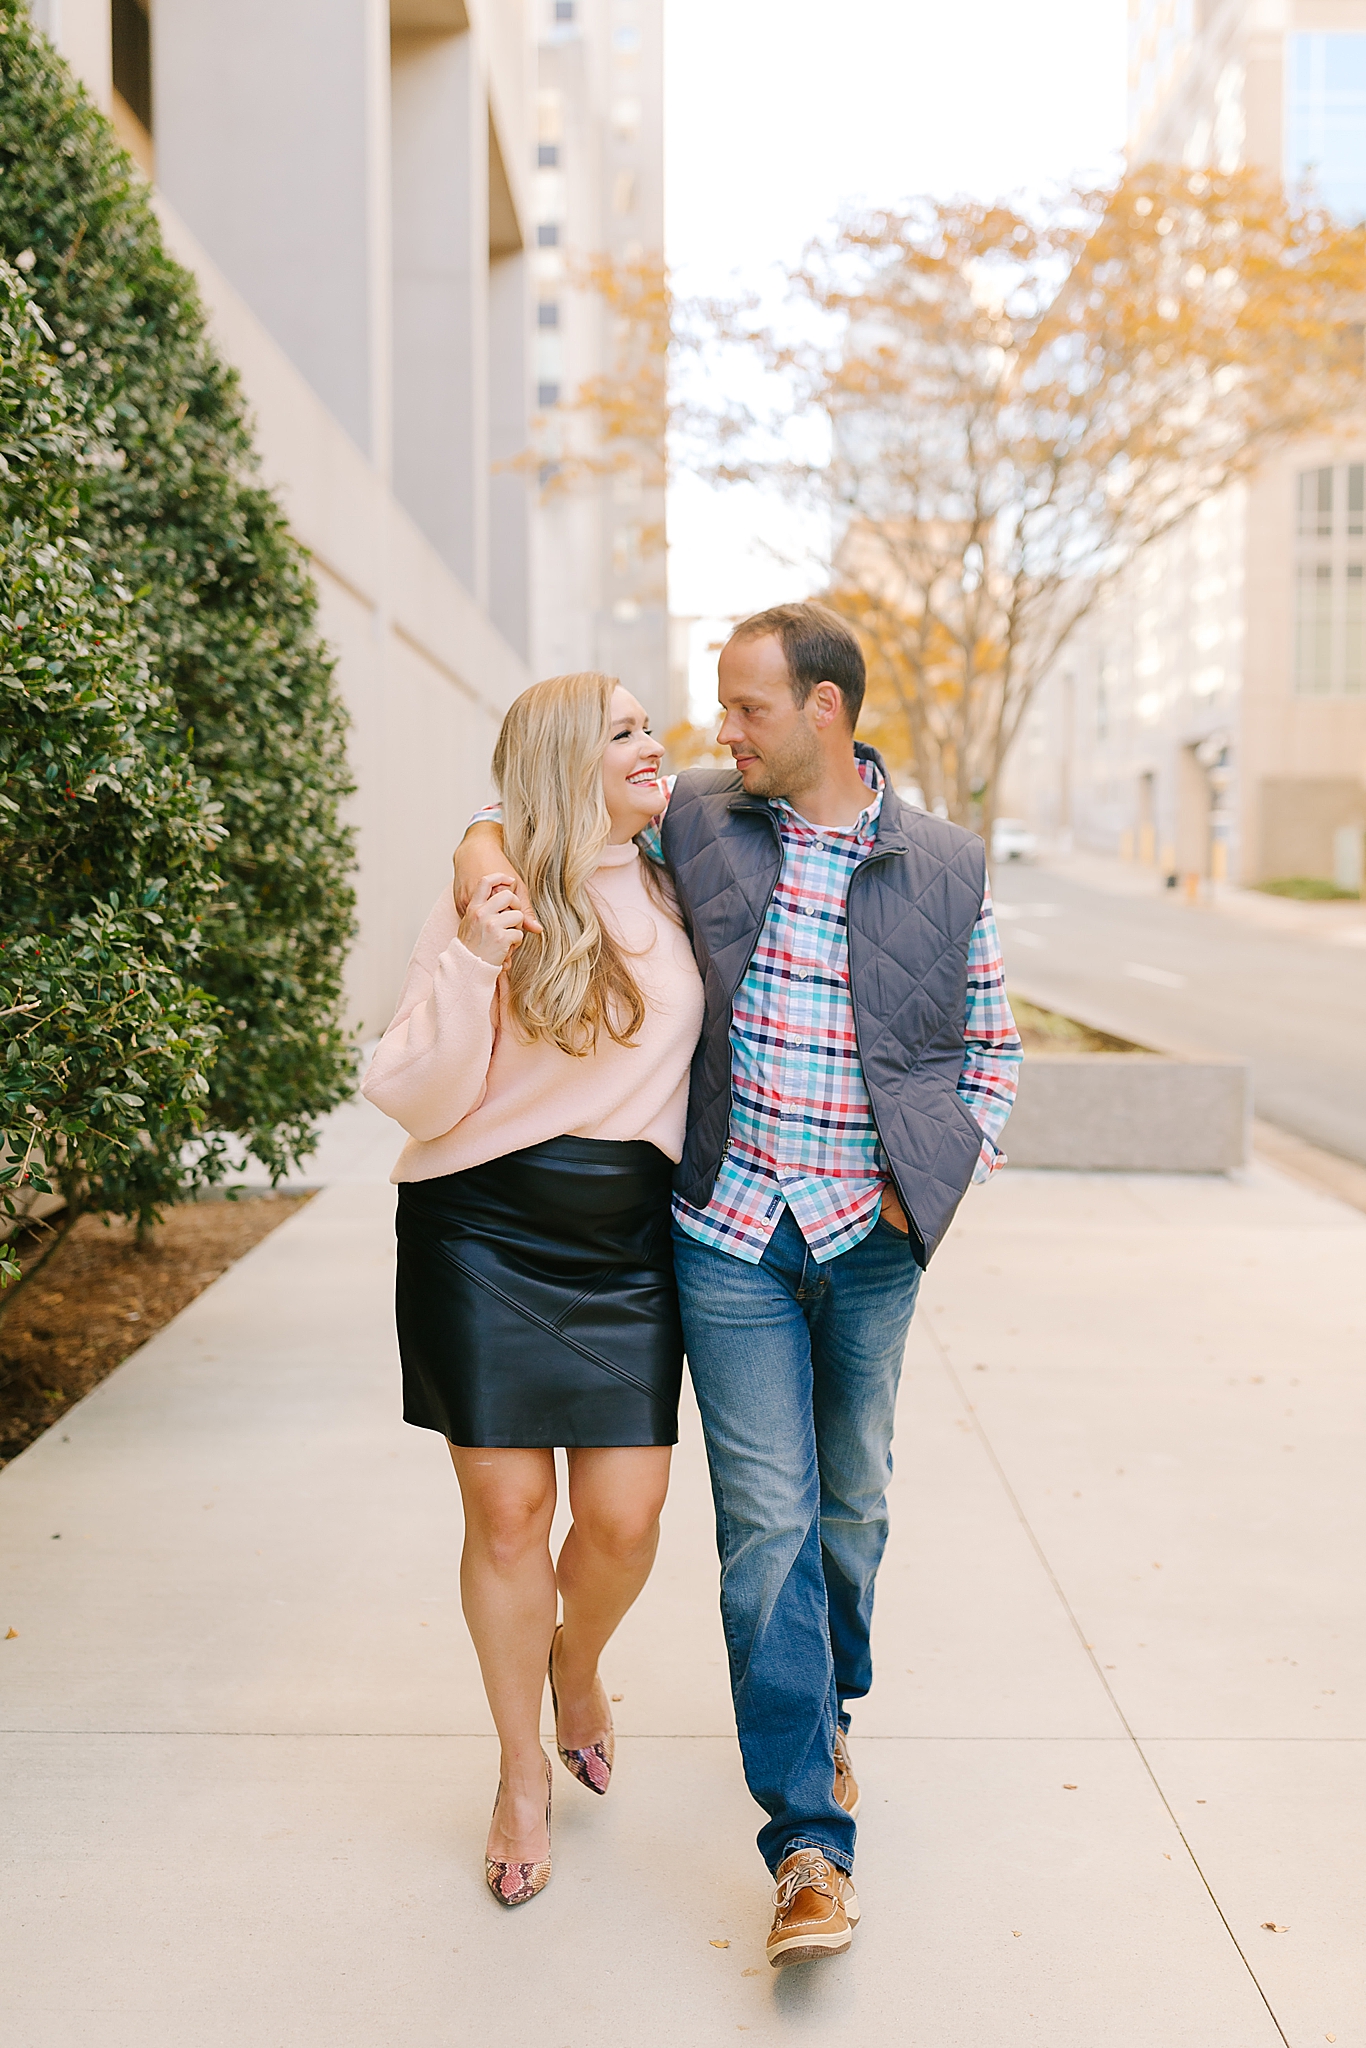 Downtown Winston-Salem anniversary portraits in the fall